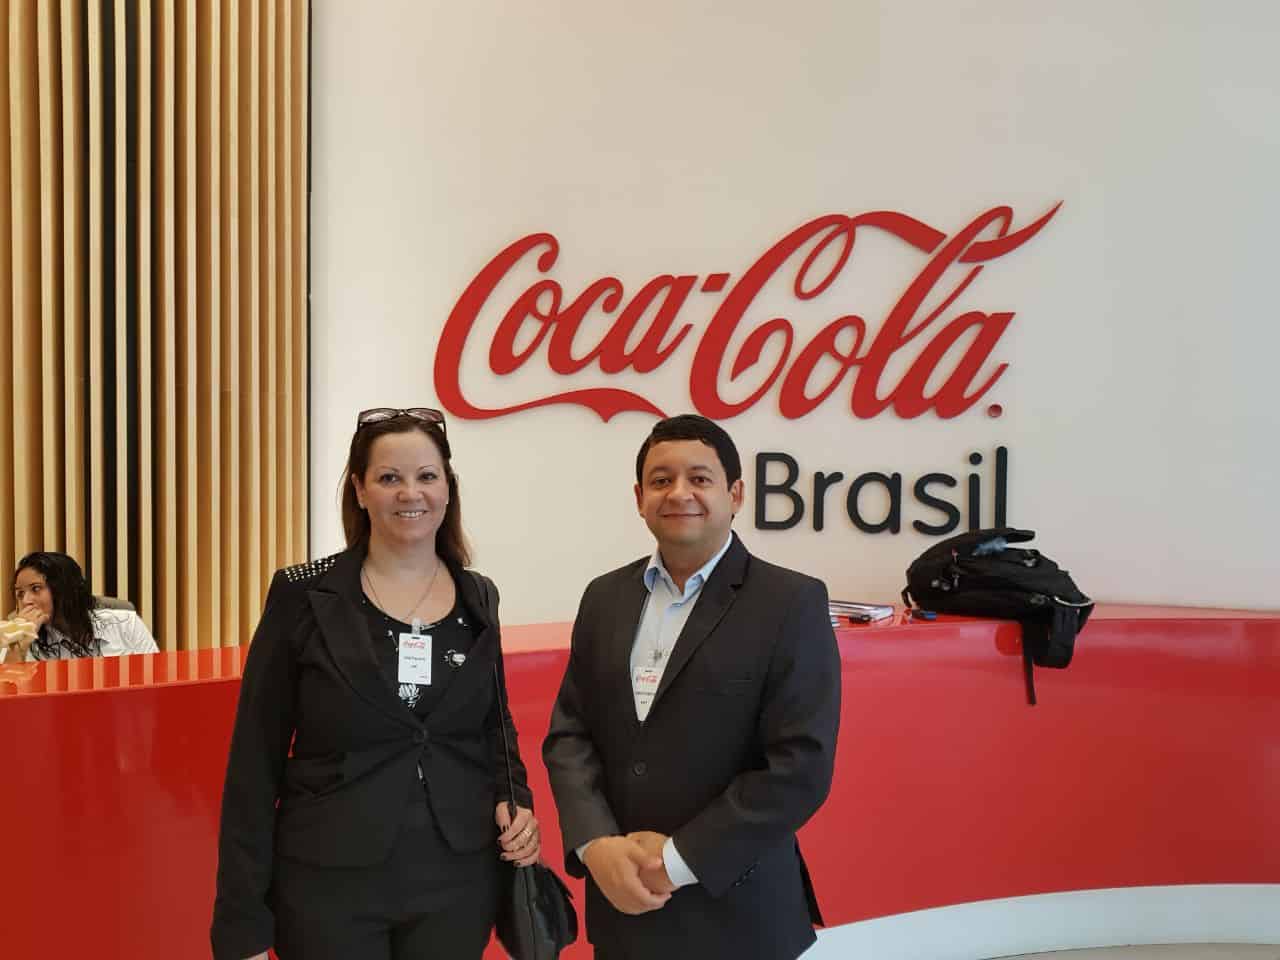 Mrs. Claudia Münch-Yttereng, director of JustSweet at Coca-Cola Brazil